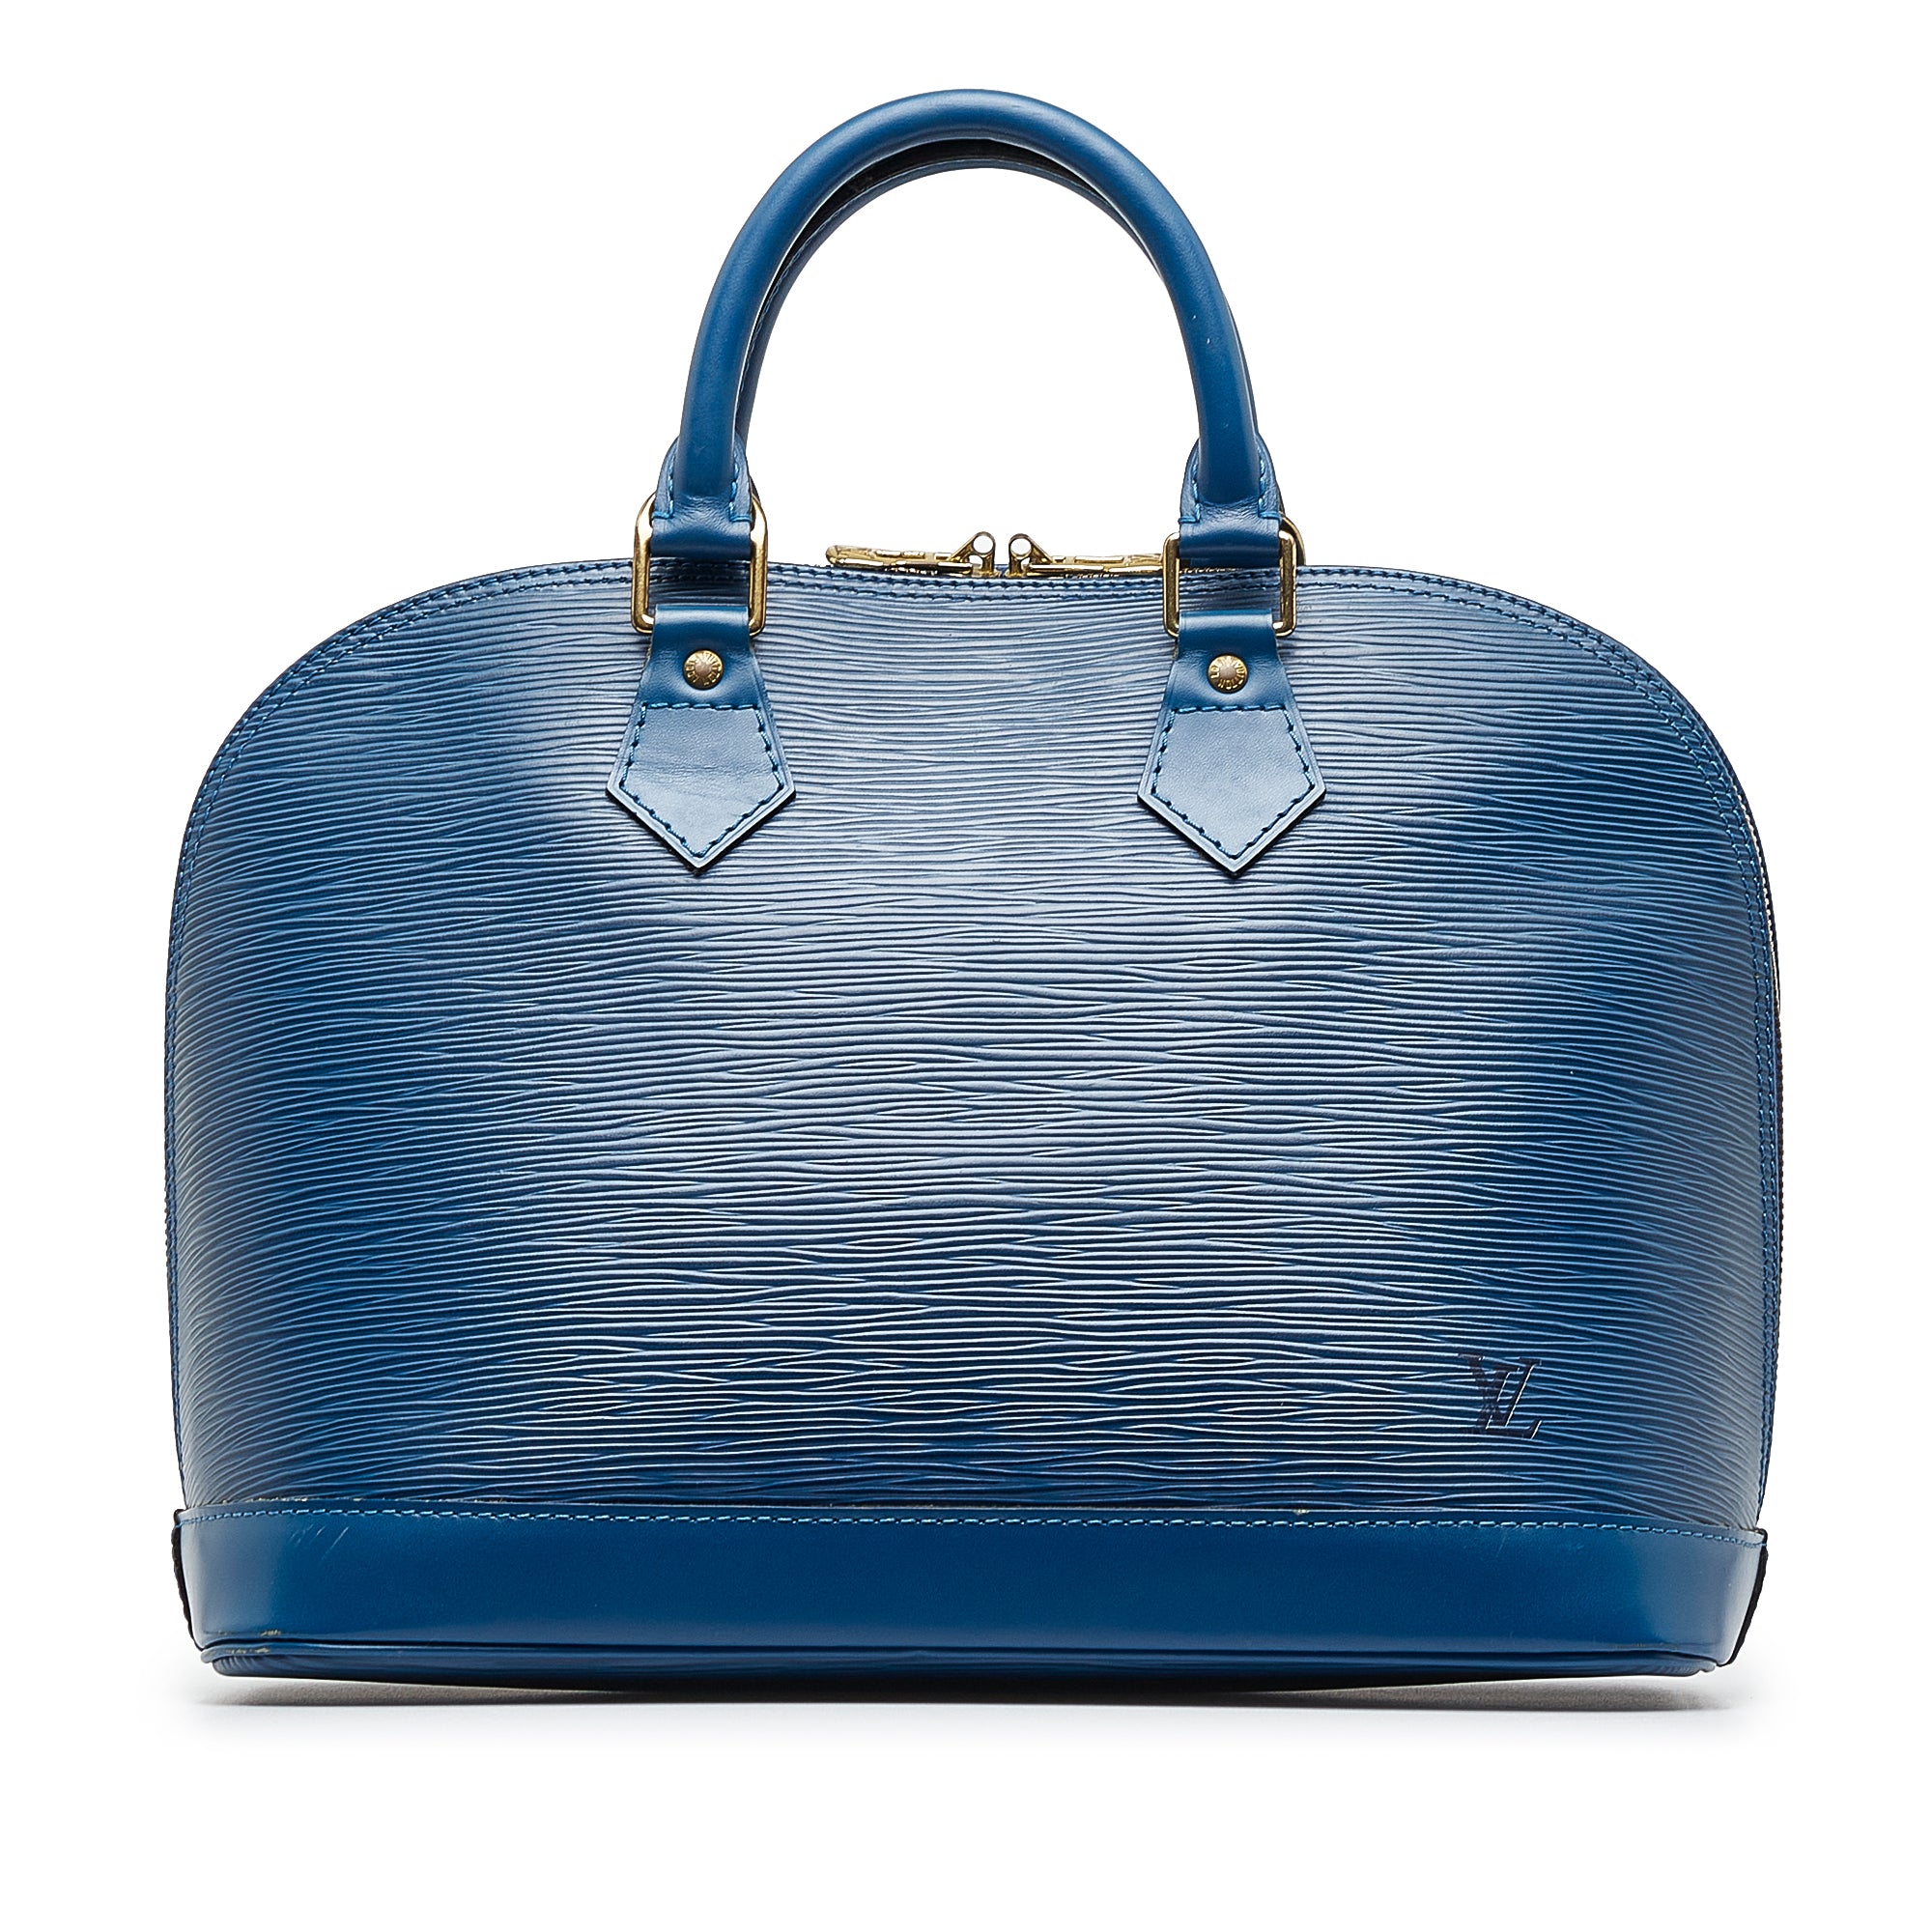 LOUIS VUITTON Epi Turenne PM - More Than You Can Imagine